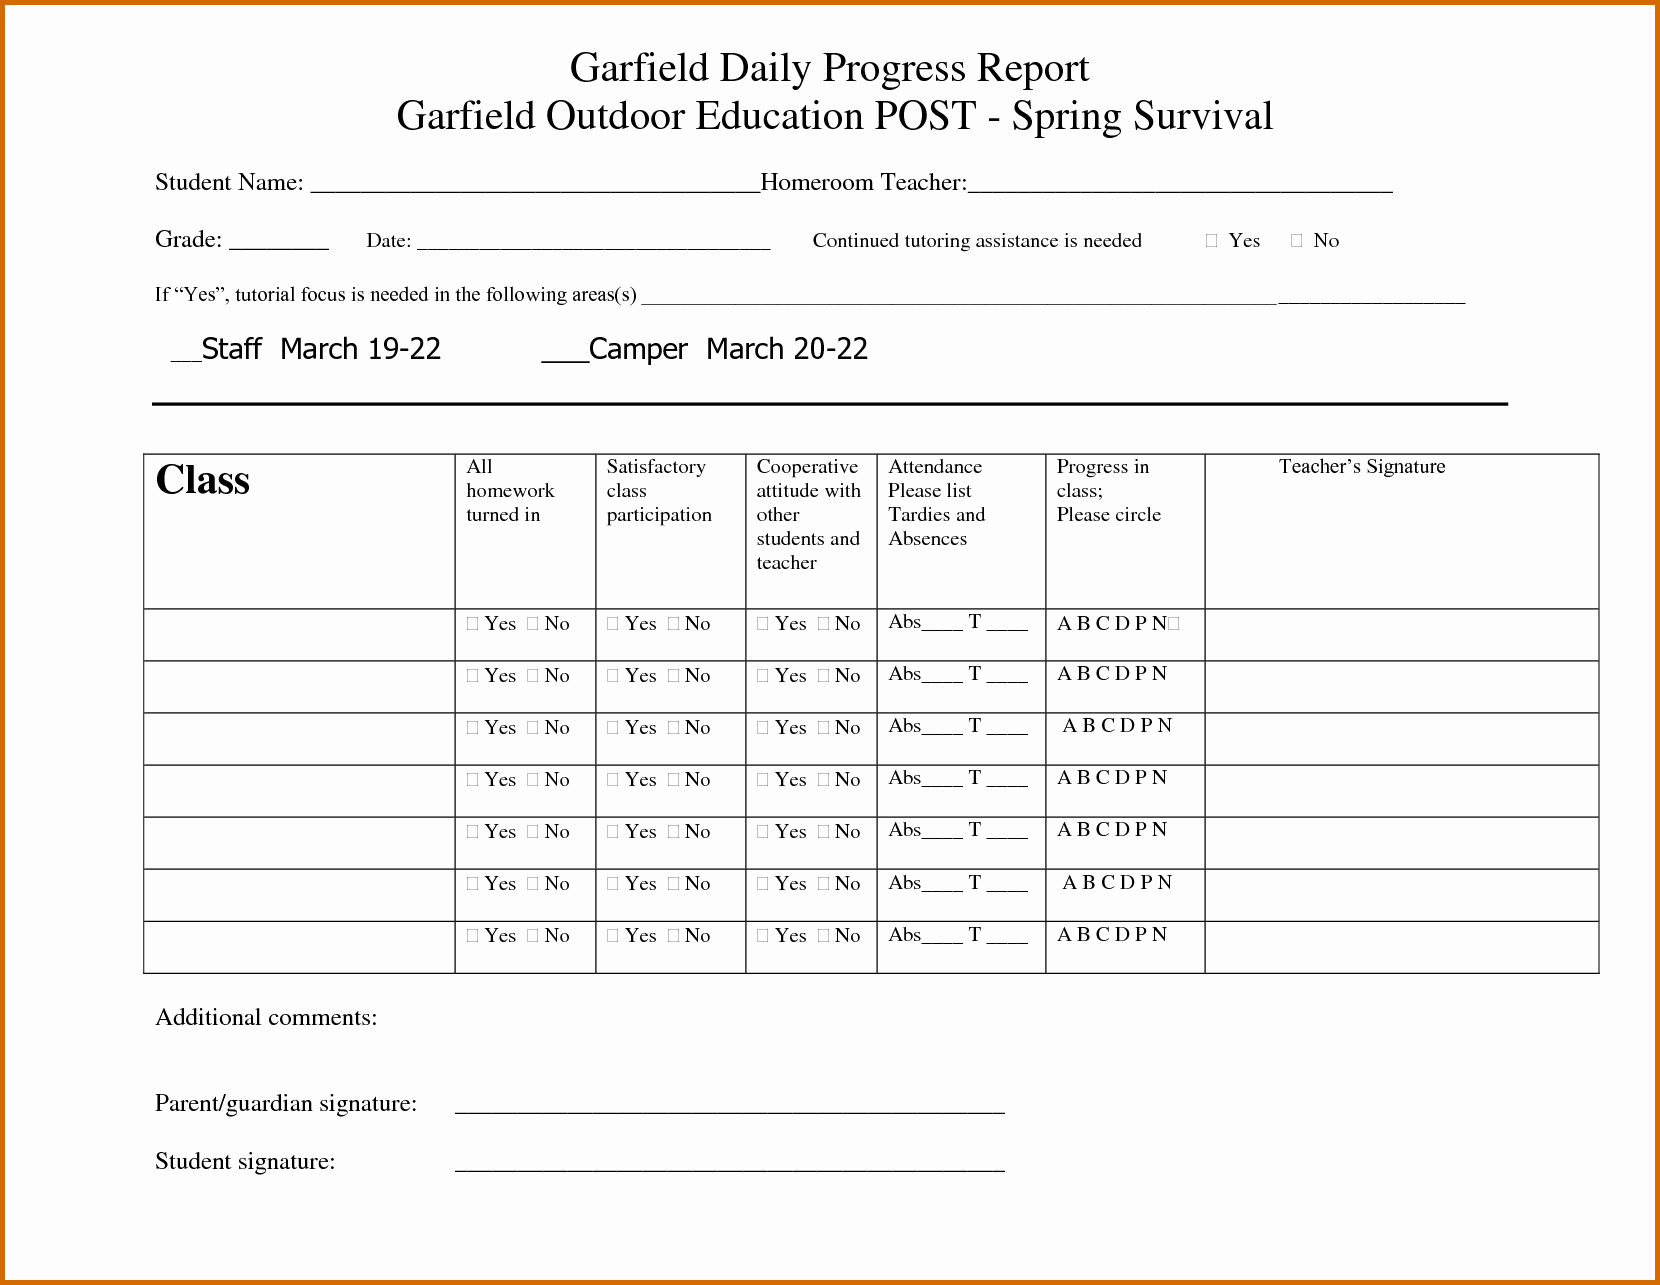 Student Progress Report Template Luxury 13 Progress Reports for Elementary Students